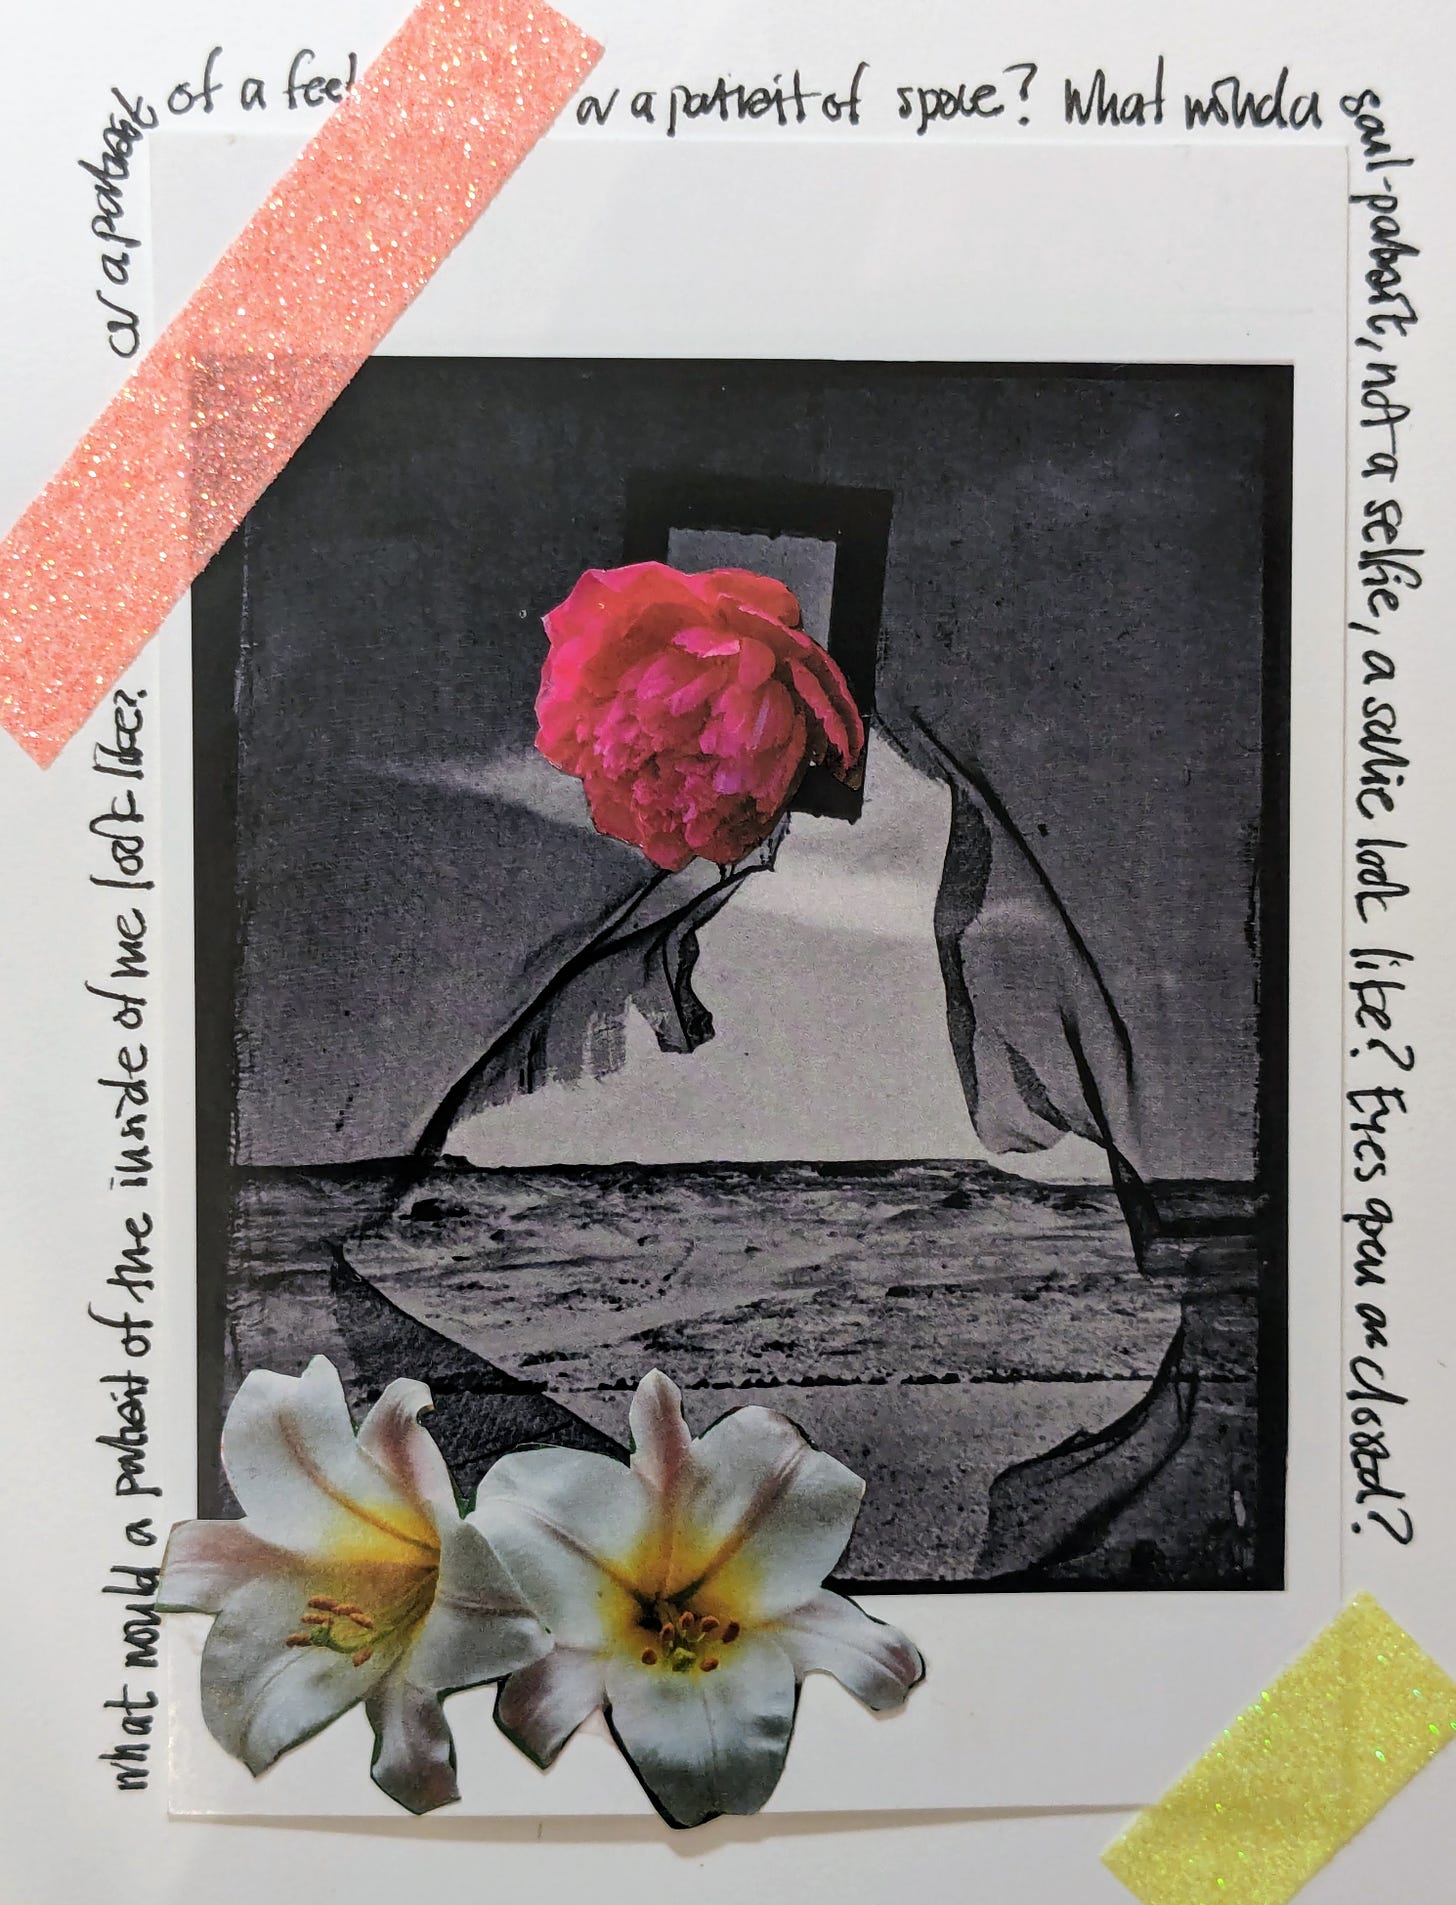 Altered image: black and white photographic print by artist Lee Miller in a postcard format, altered with collage of bright flowers and text 